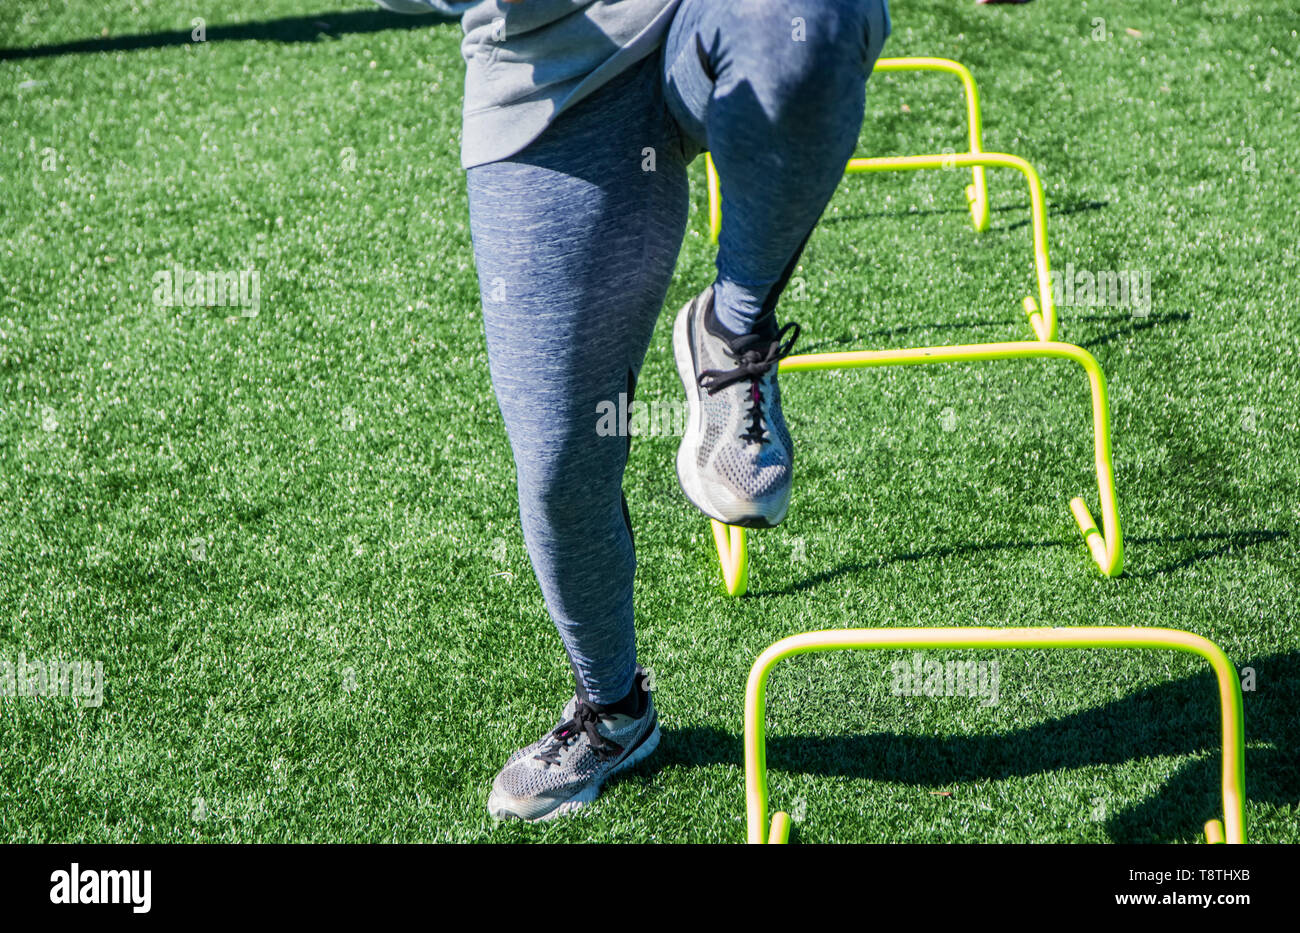 A high school athlete is at track and field practice warming up by running over the side of yellow mini hurdles. Stock Photo